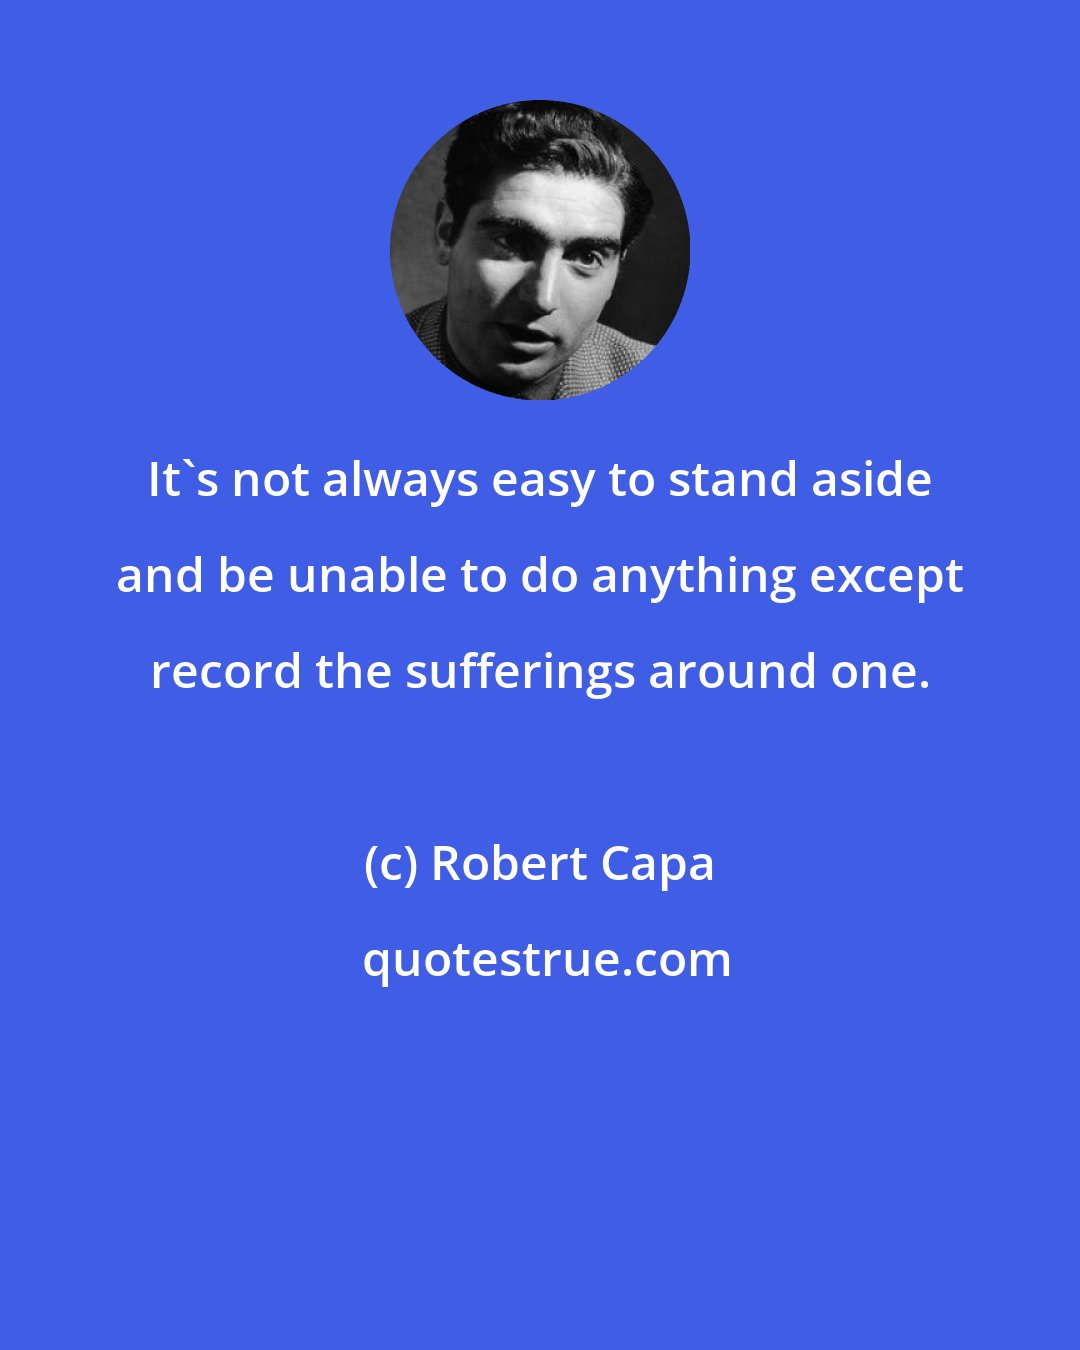 Robert Capa: It's not always easy to stand aside and be unable to do anything except record the sufferings around one.